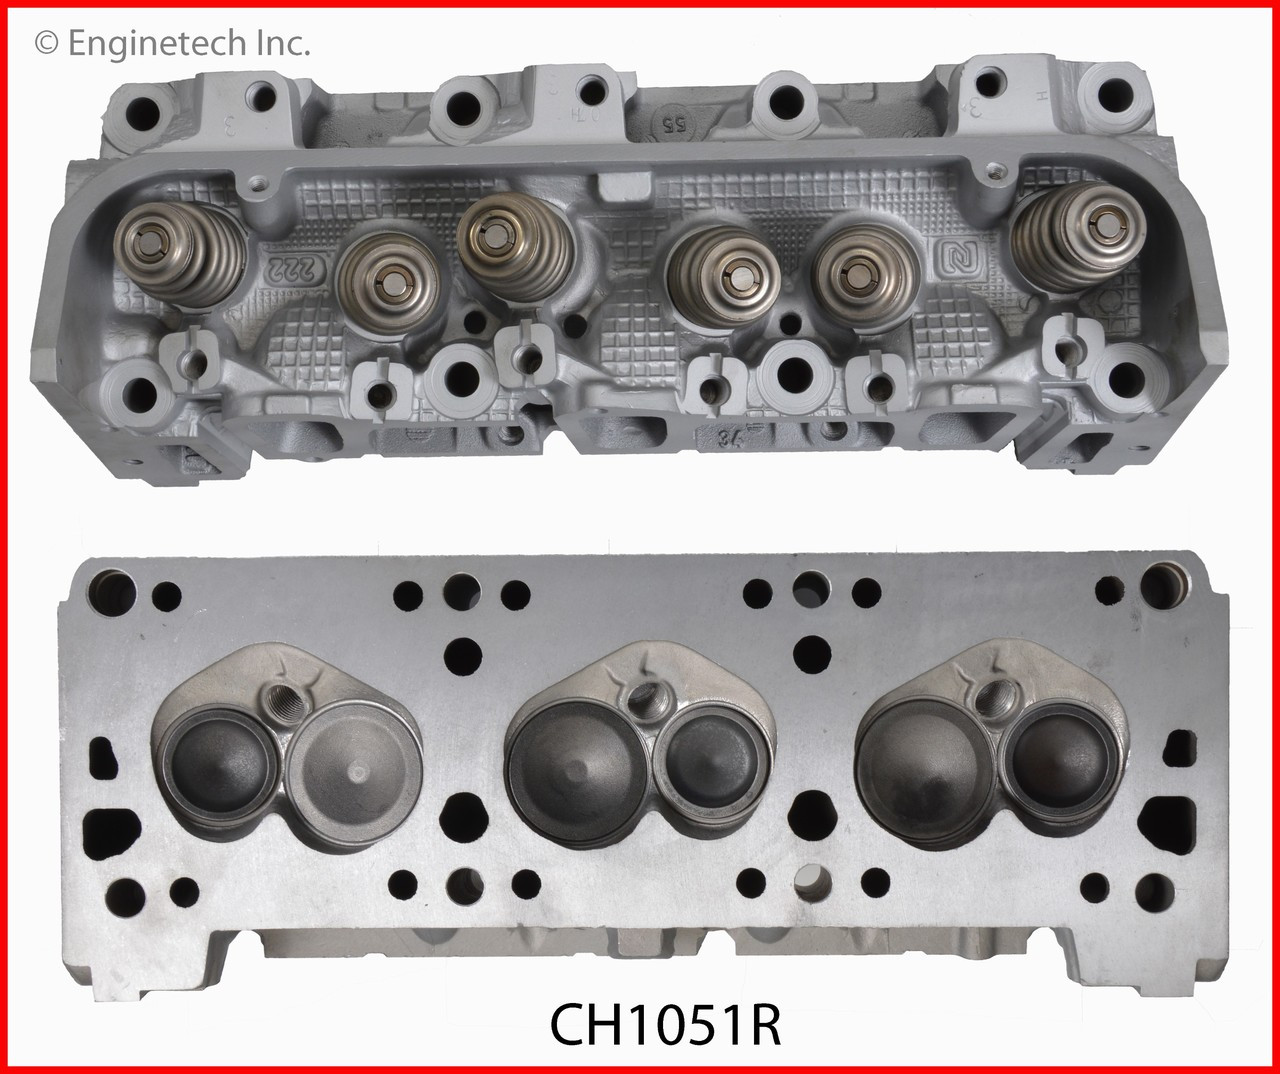 Cylinder Head Assembly - 1997 Chevrolet Venture 3.4L (CH1051R.A3)